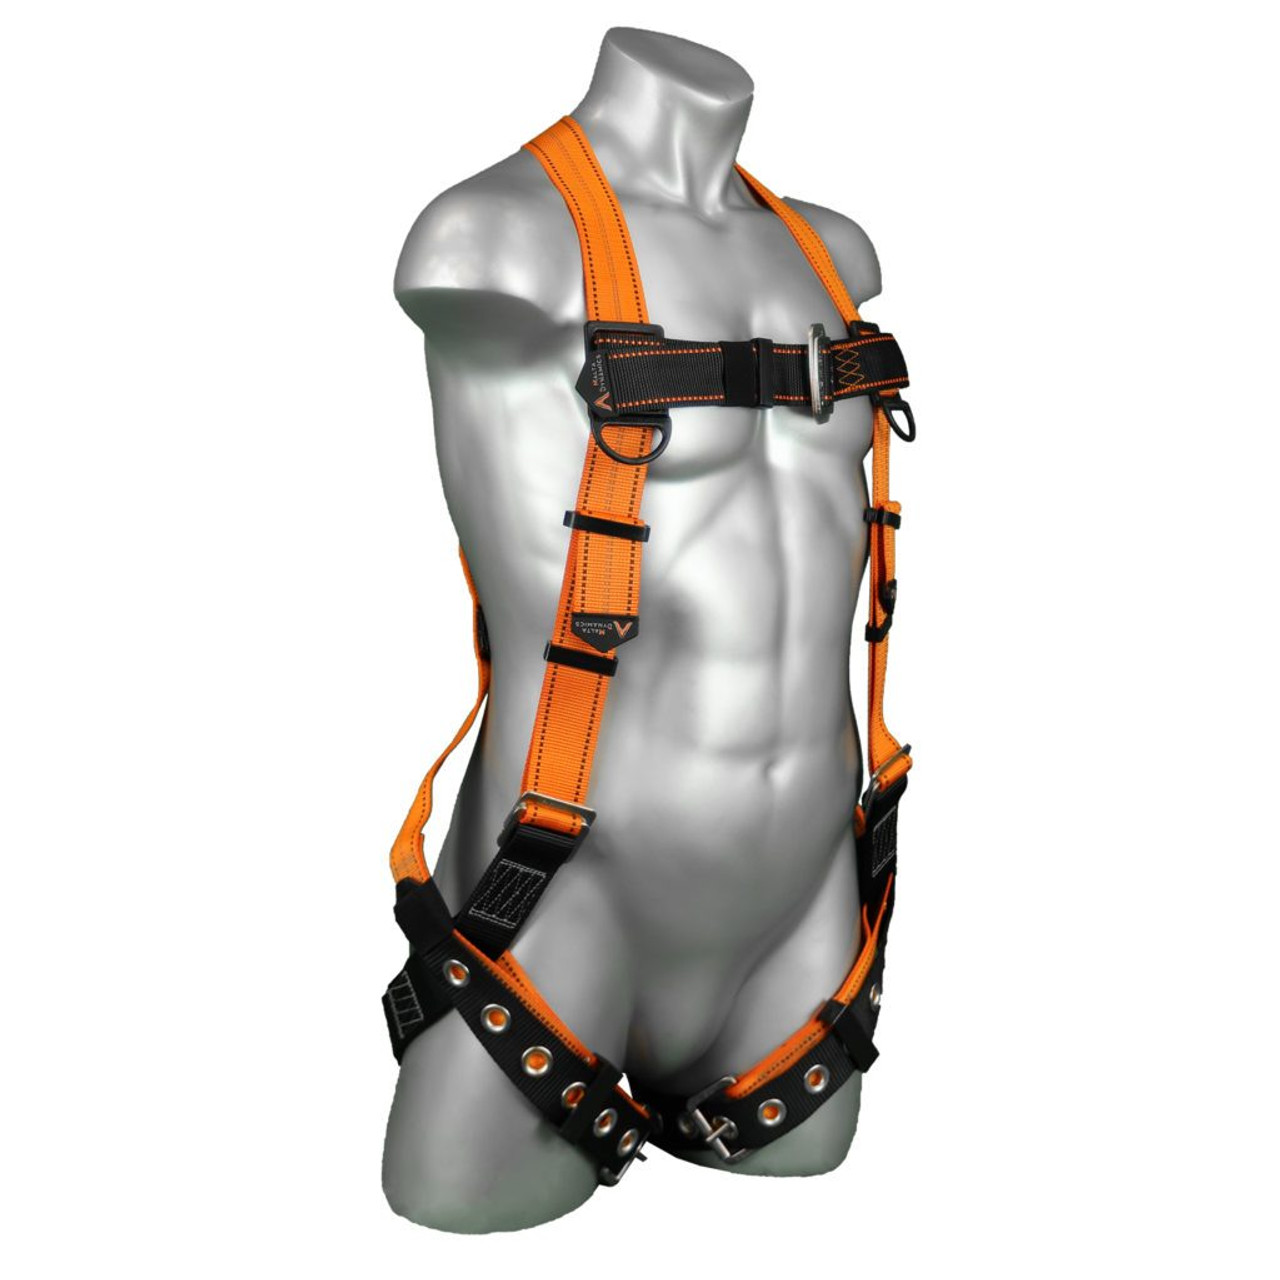 Malta Dynamics B2002 Warthog harness for construction workers.